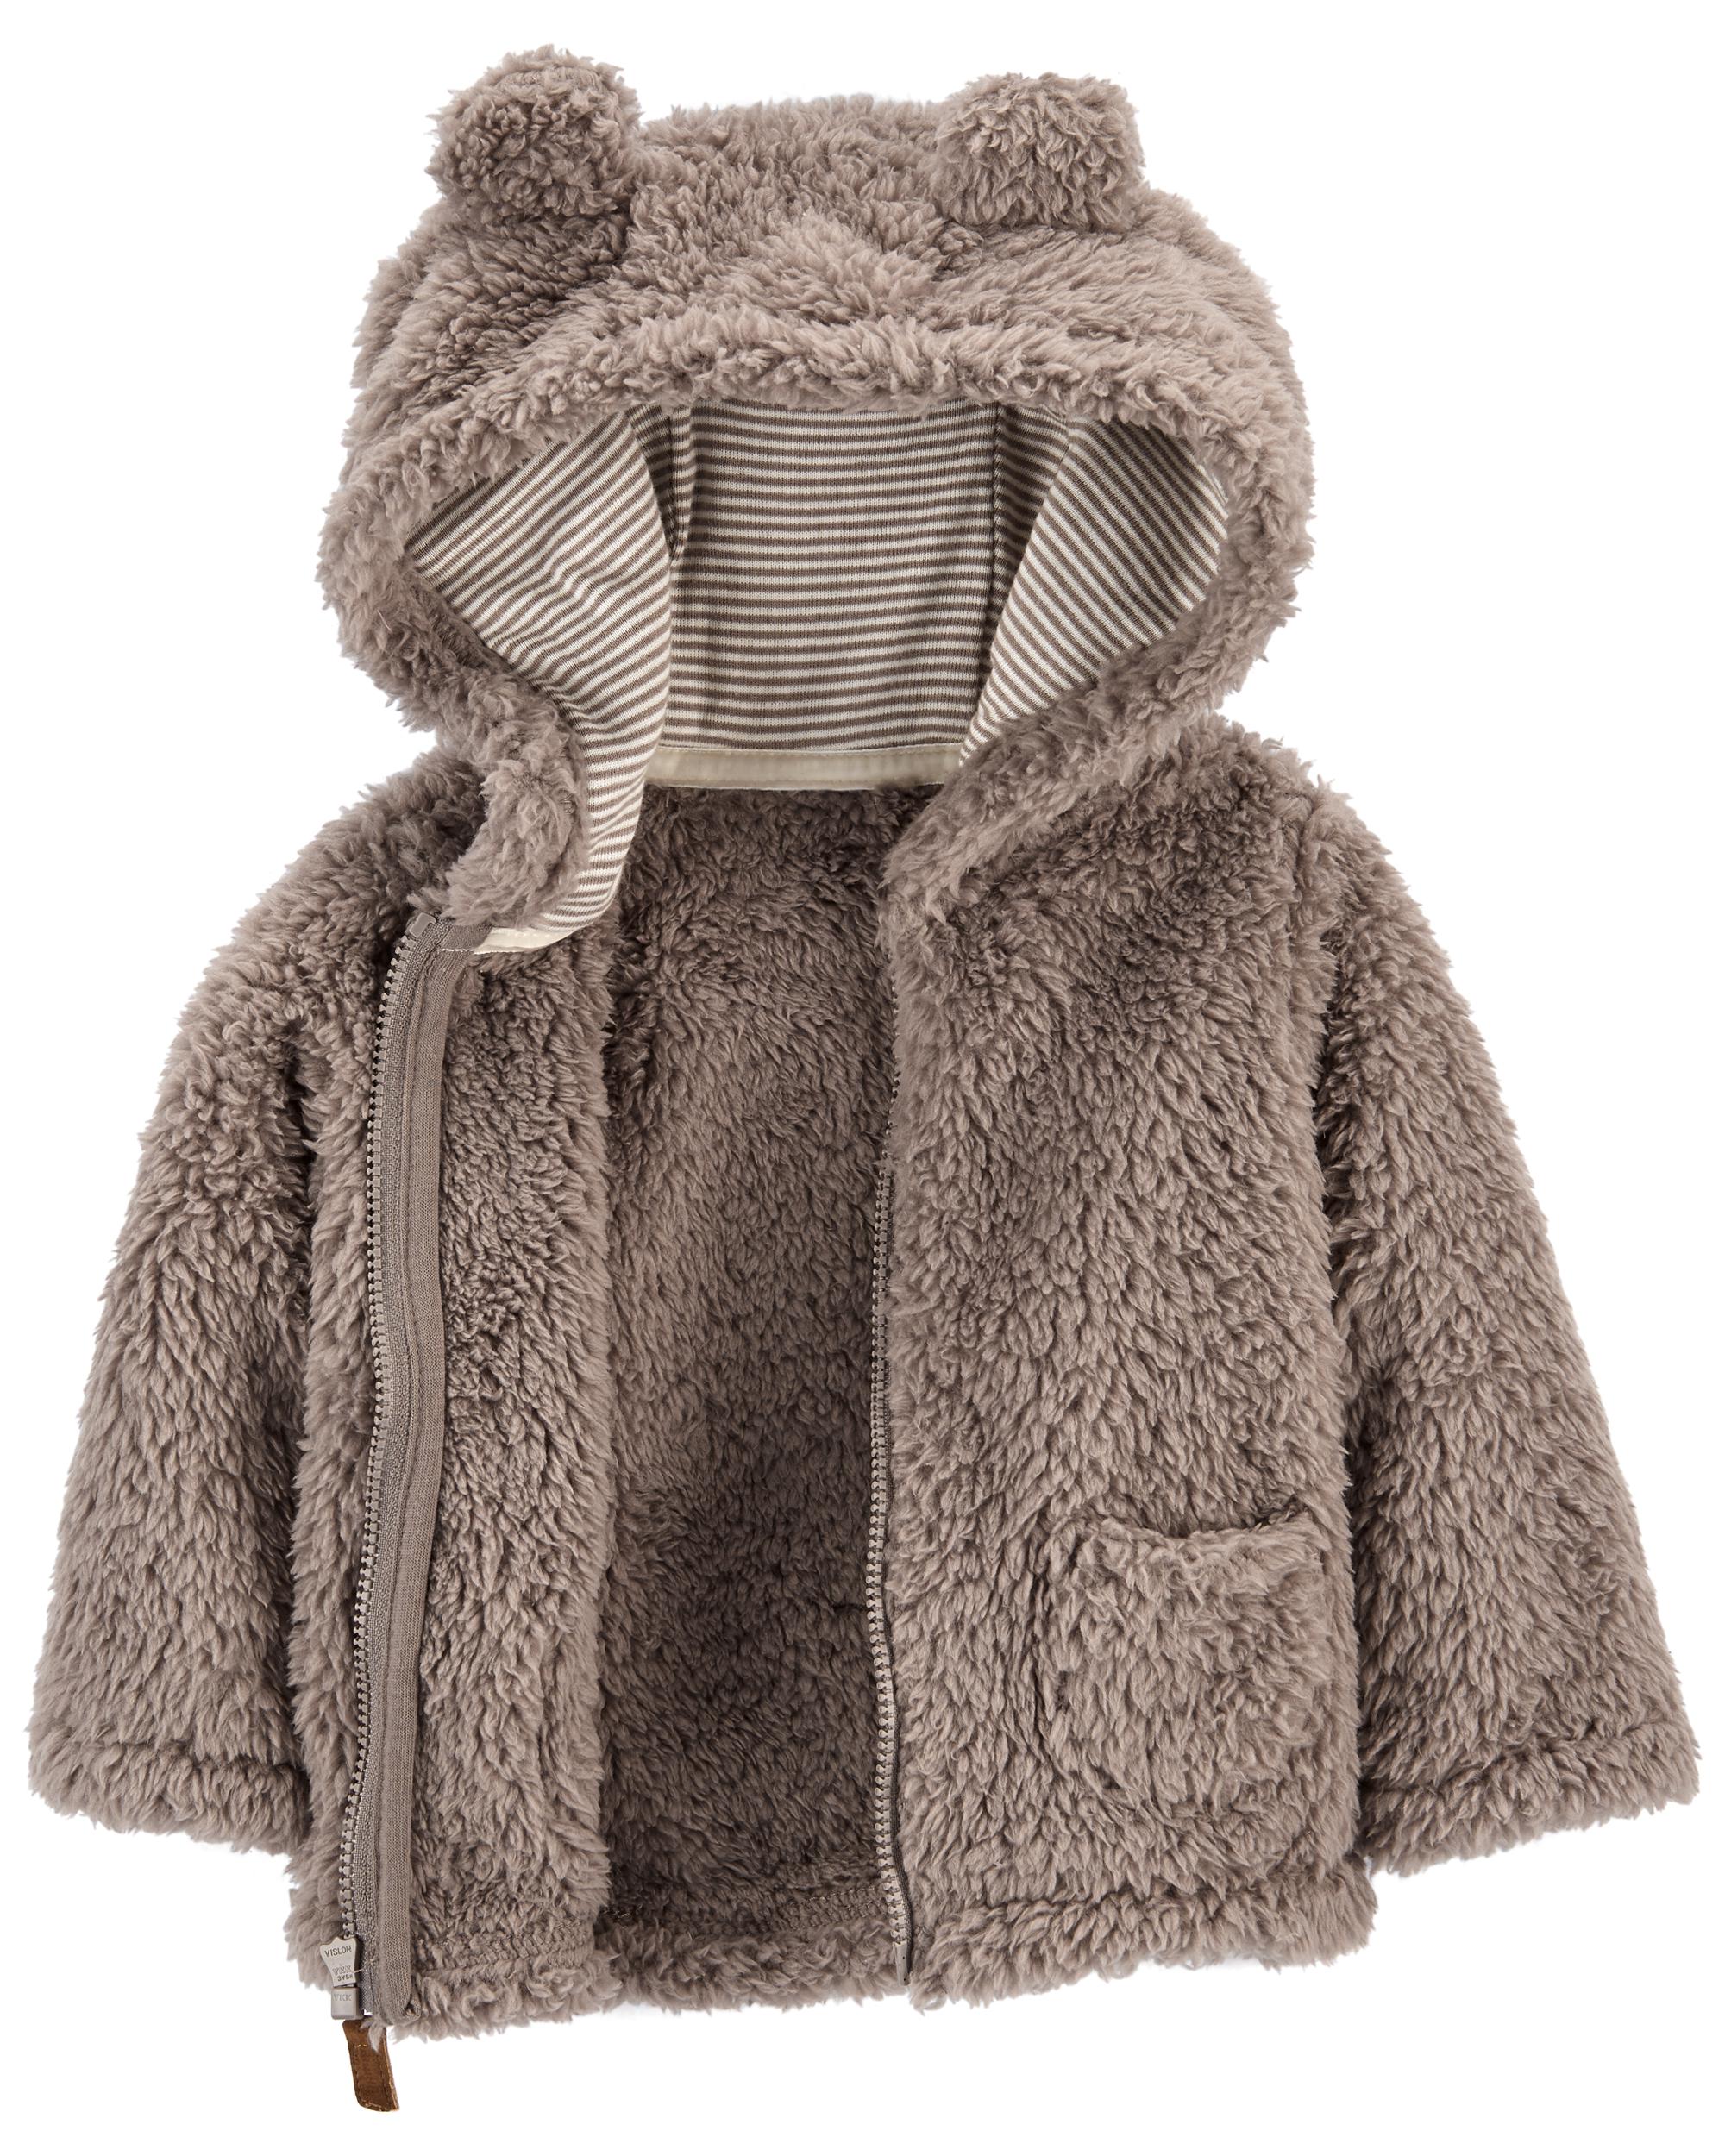 Carters 0-24 Months Sherpa Jacket